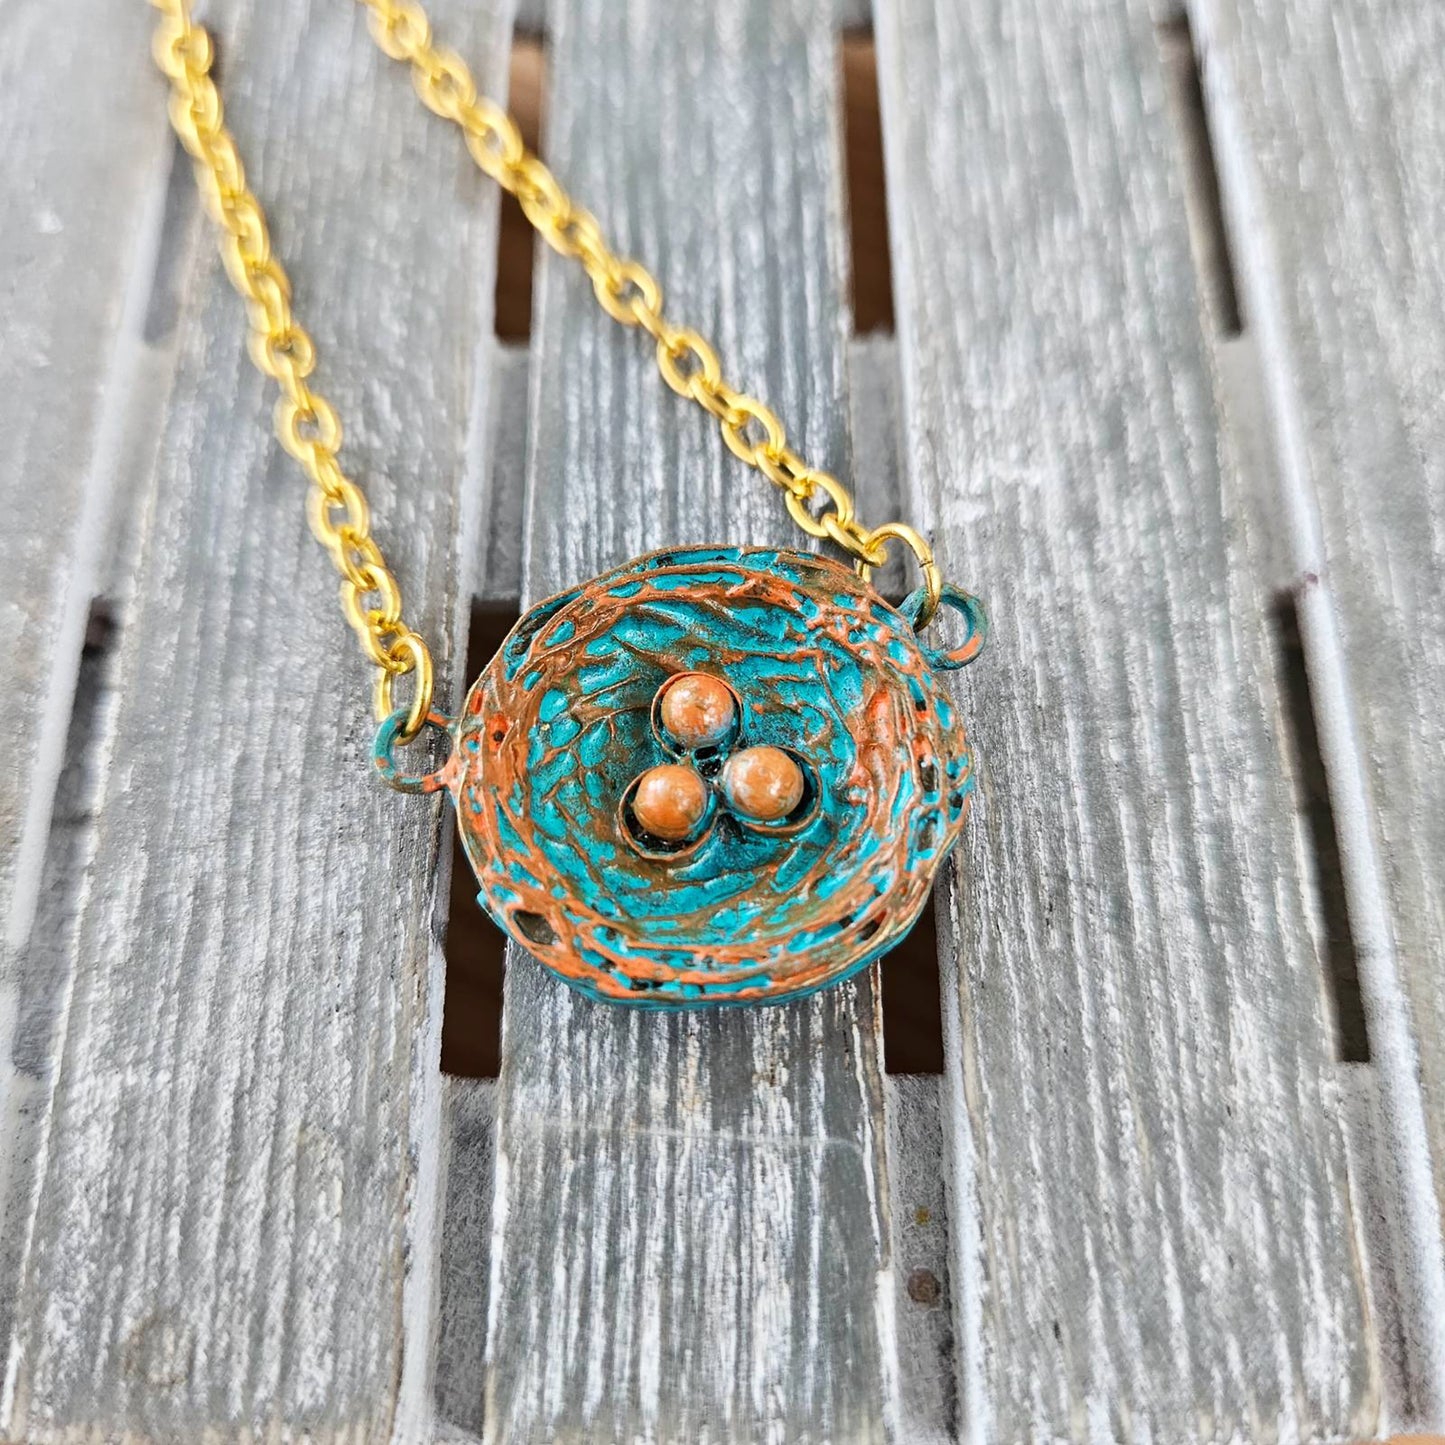 "Birdnest Pendant - Make a statement with our handcrafted Bird's Nest Pendant. 🥚💫"